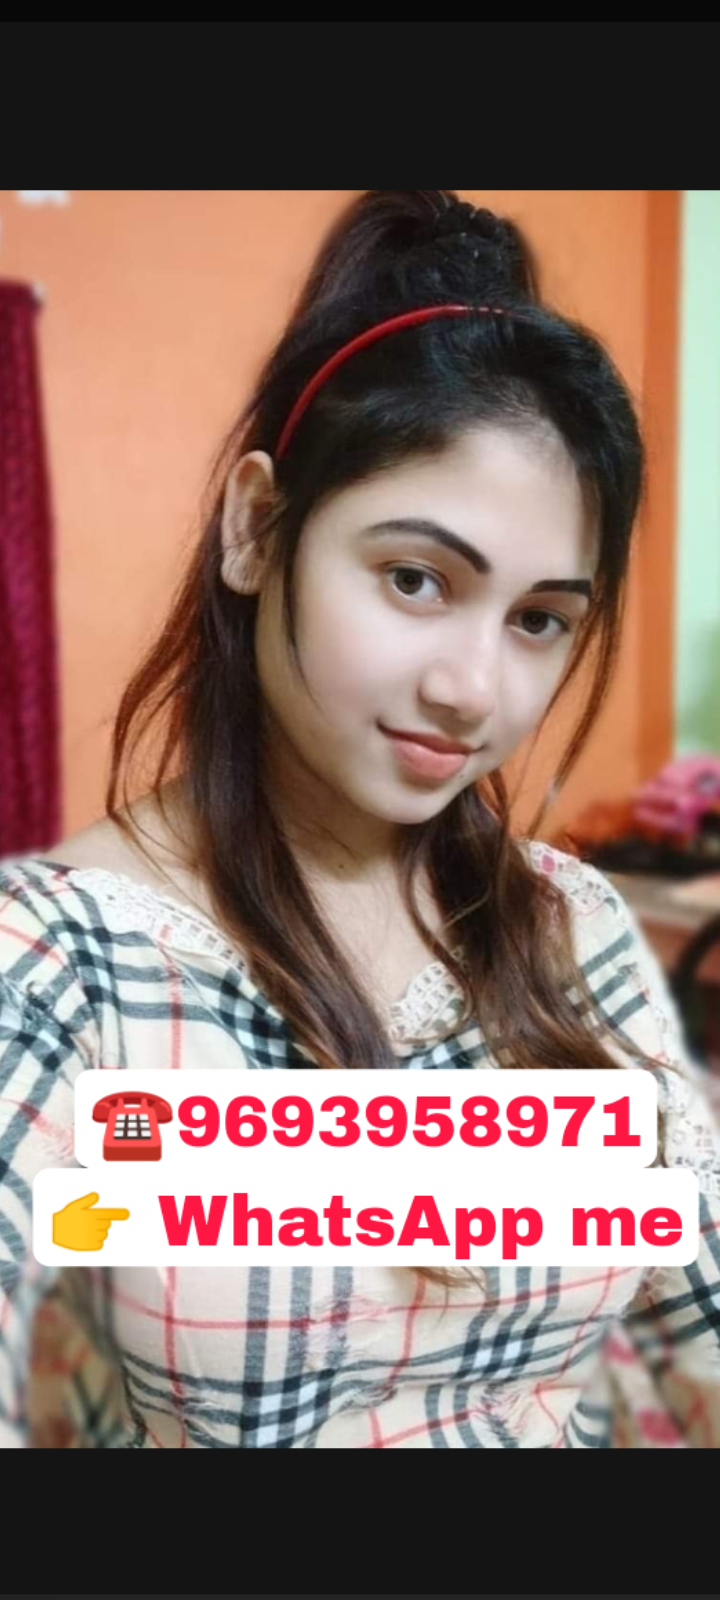 ALANDI 🛑 only for sex 🛑 call me 